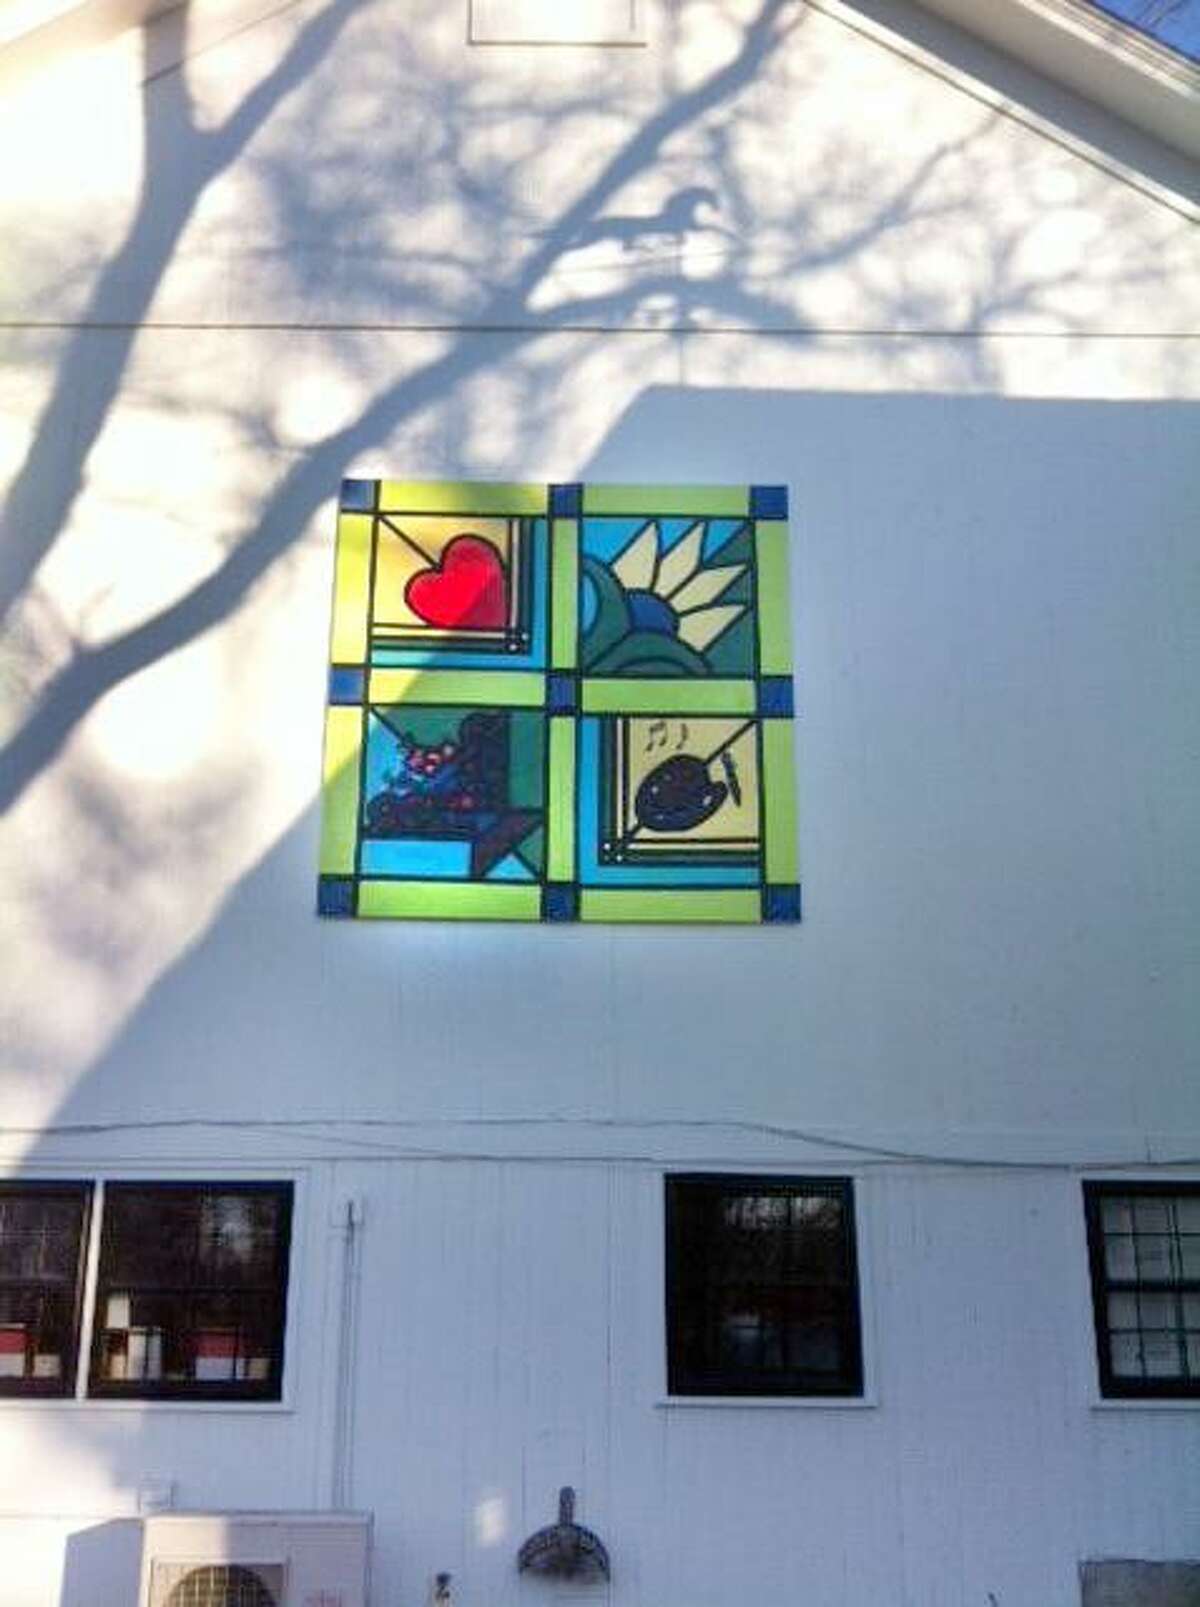 A quilt painting at 44 Upland Rd. in New Milford. New Milford will be the first Connecticut town to have a barn quilt trail  several barns with quiltlike painted patches on walls. The point of the endeavor is to bring attention to folk art and the towns agricultural roots.